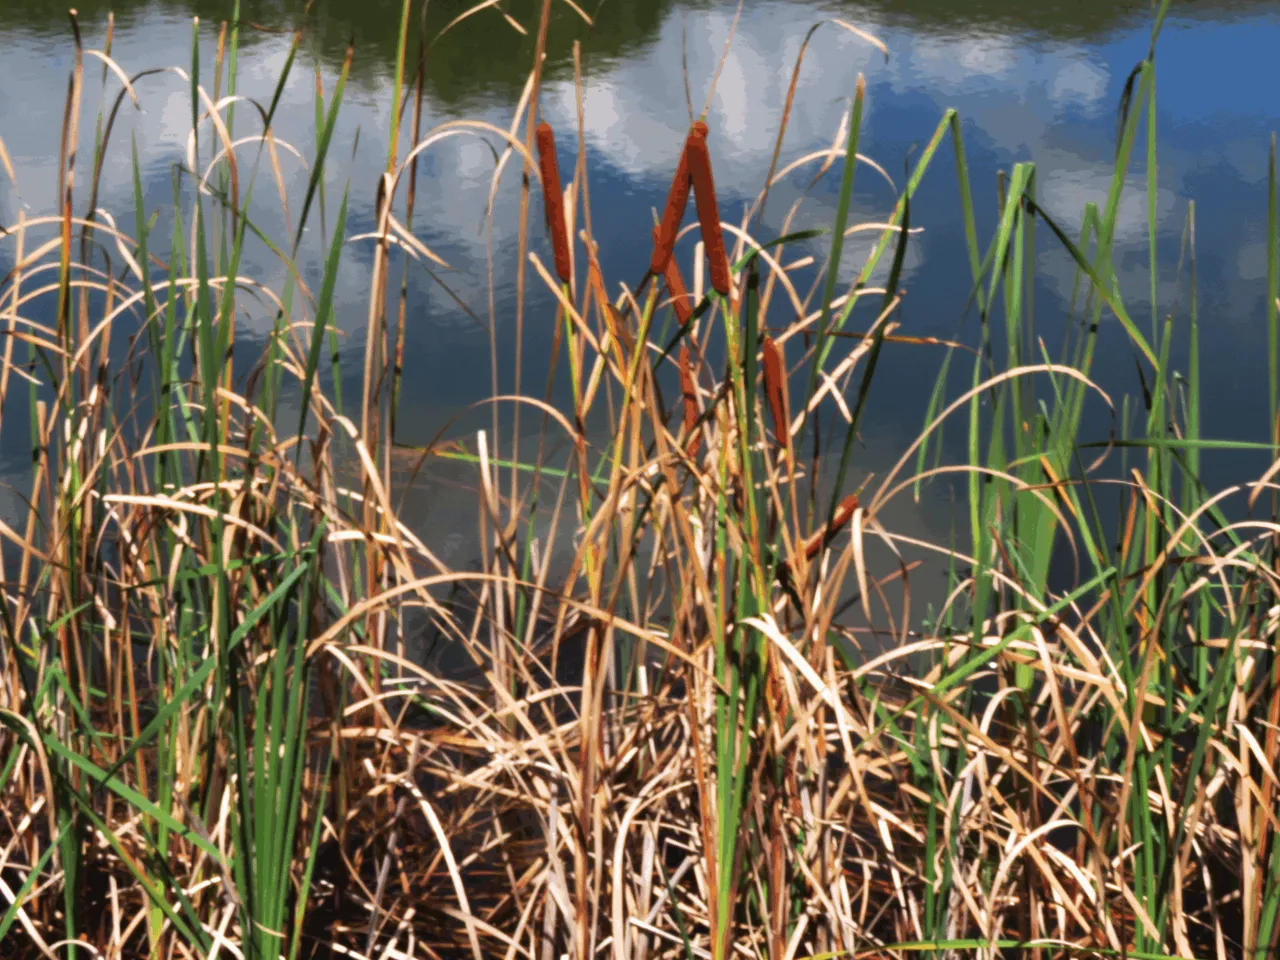 Common bulrush - Typha aapensis